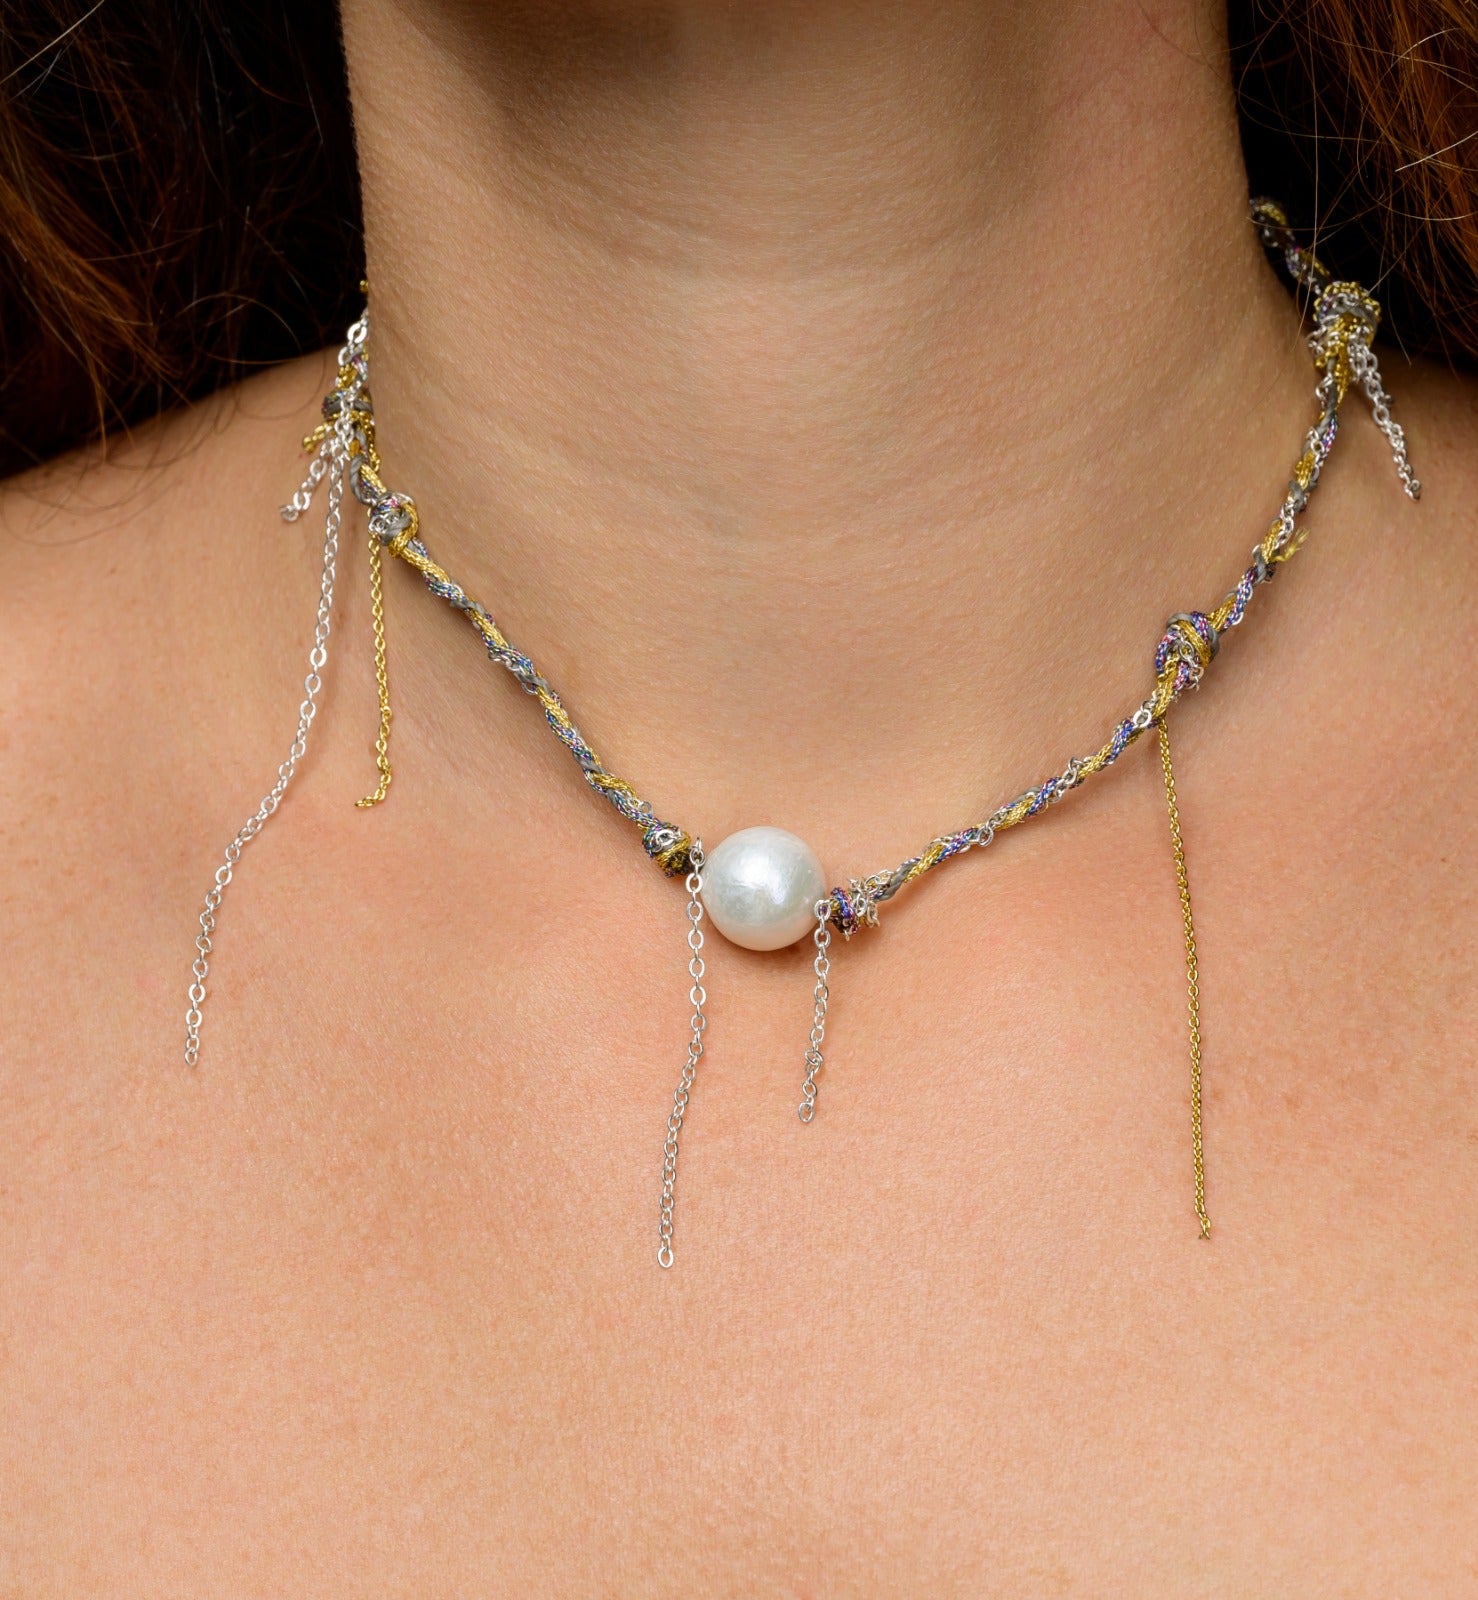 Original Necklace with Freshwater pearls on silver and plated gold chain